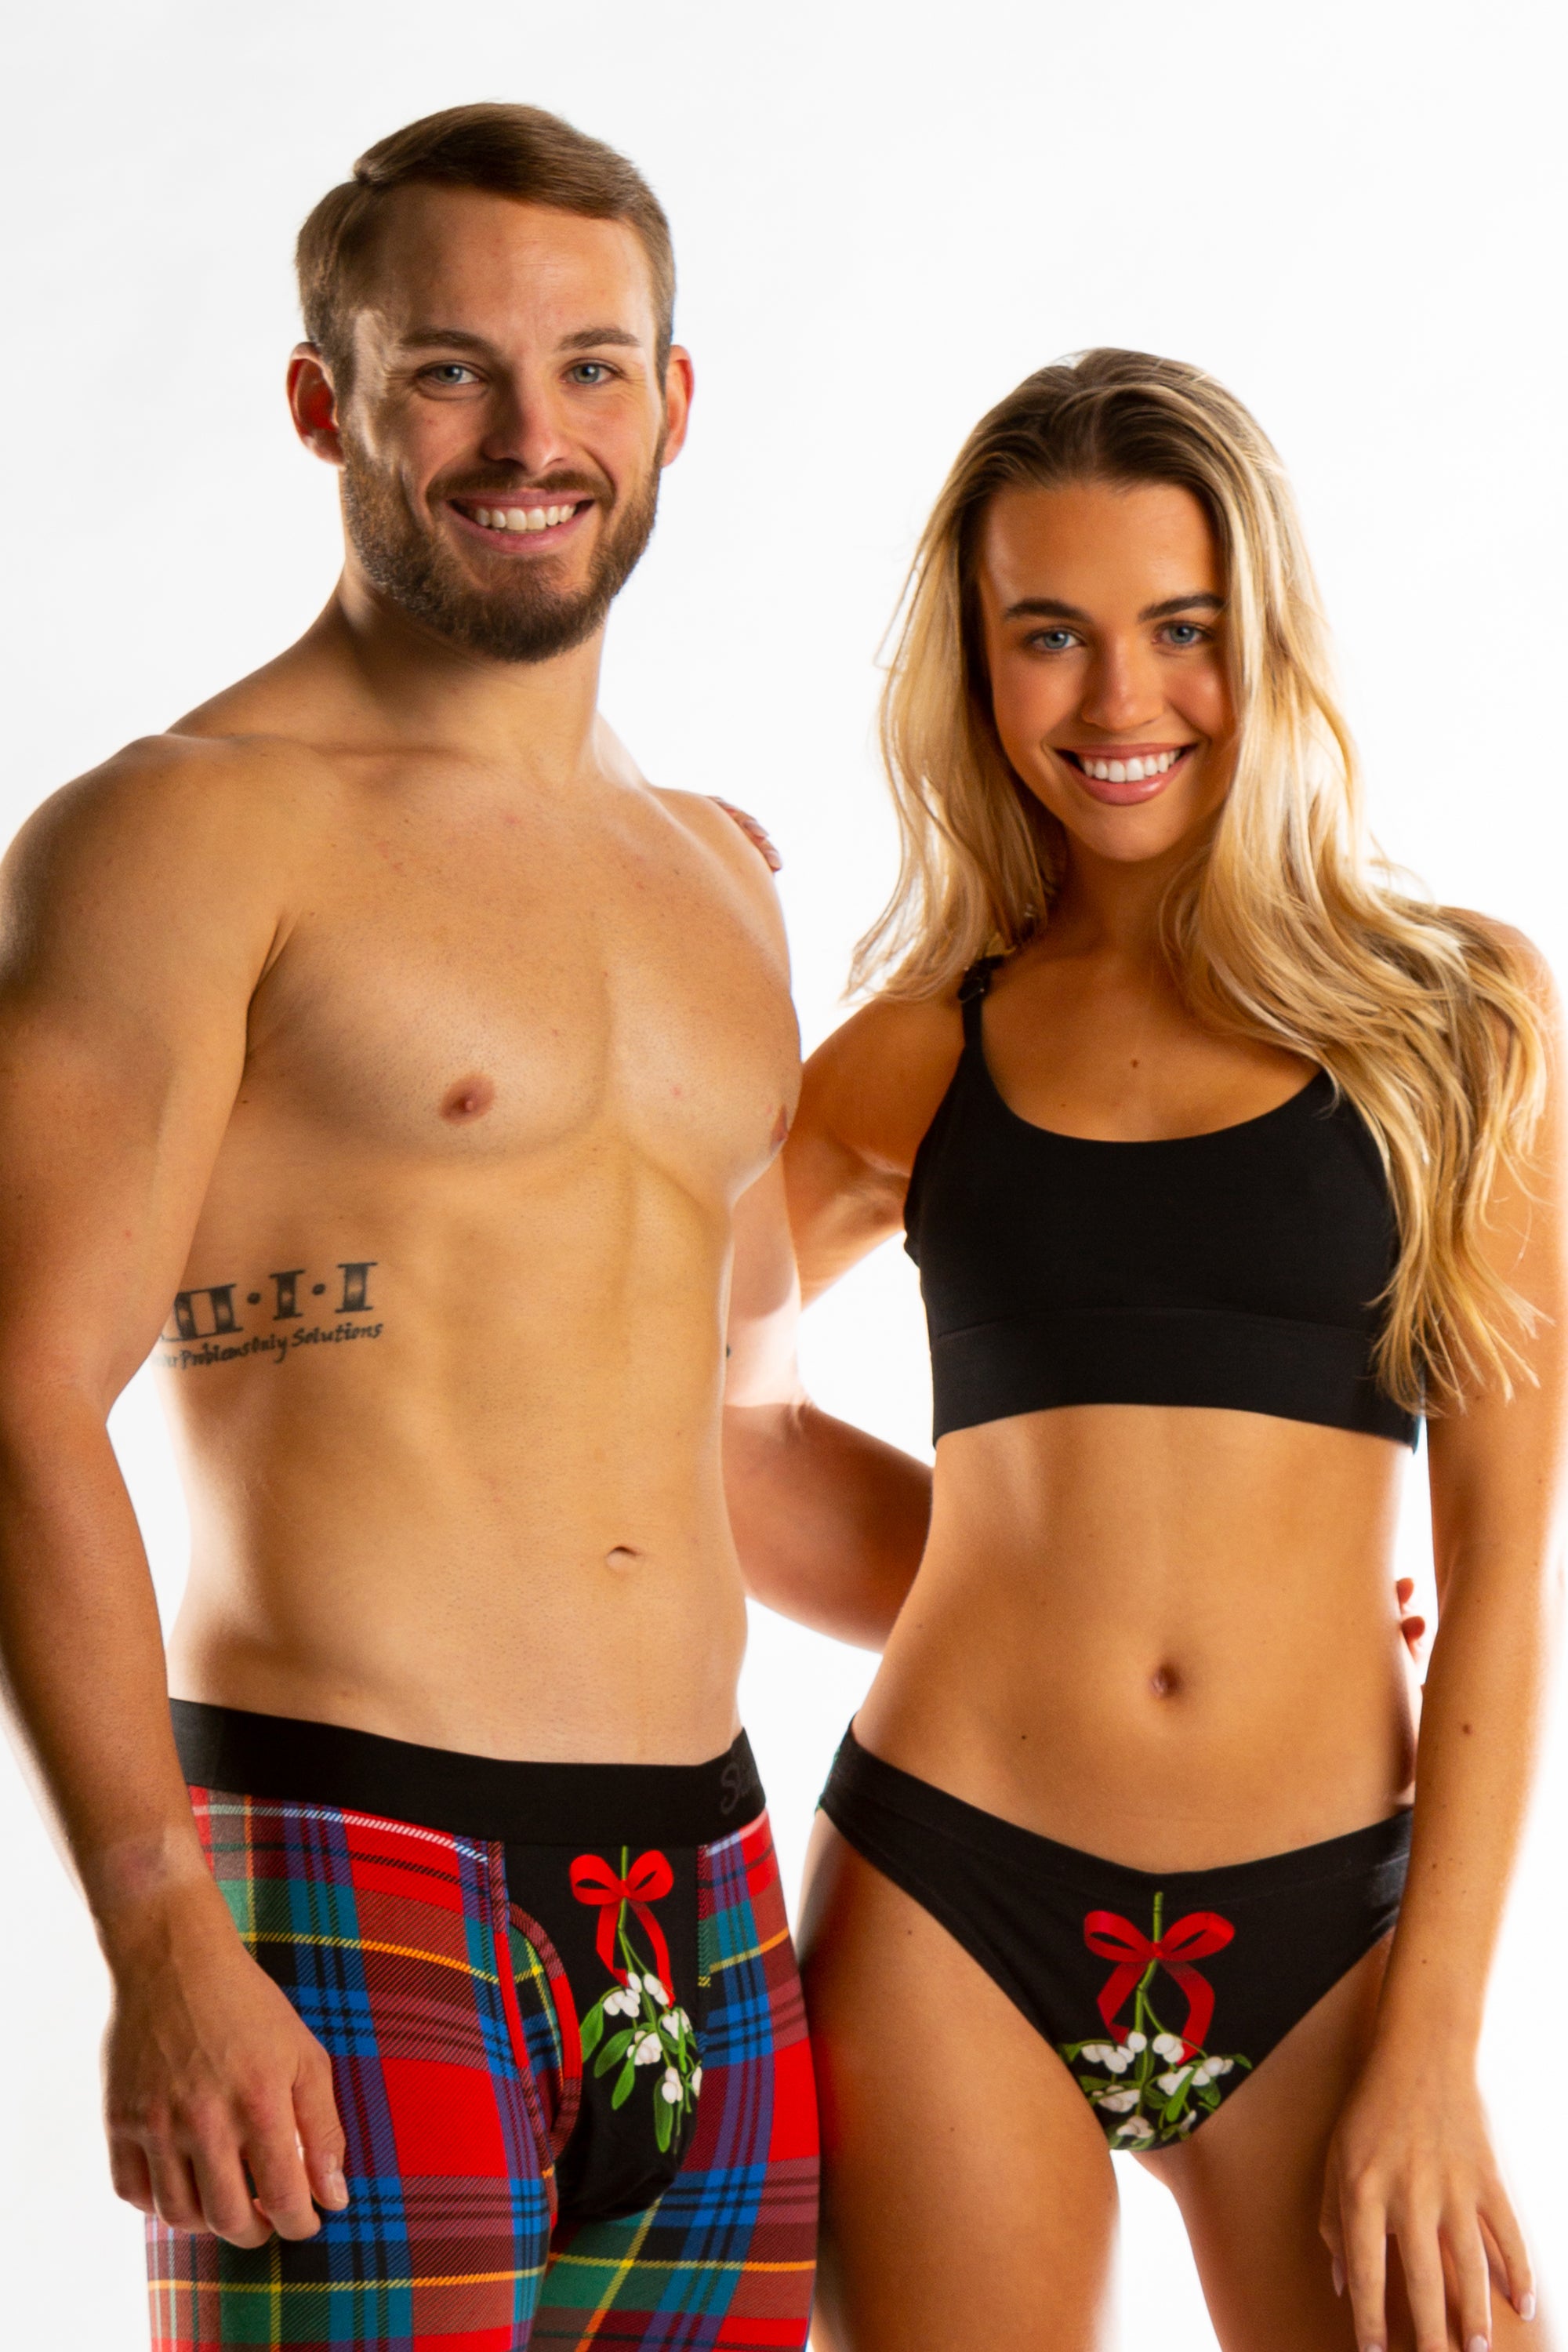 Christmas matching couples underwear